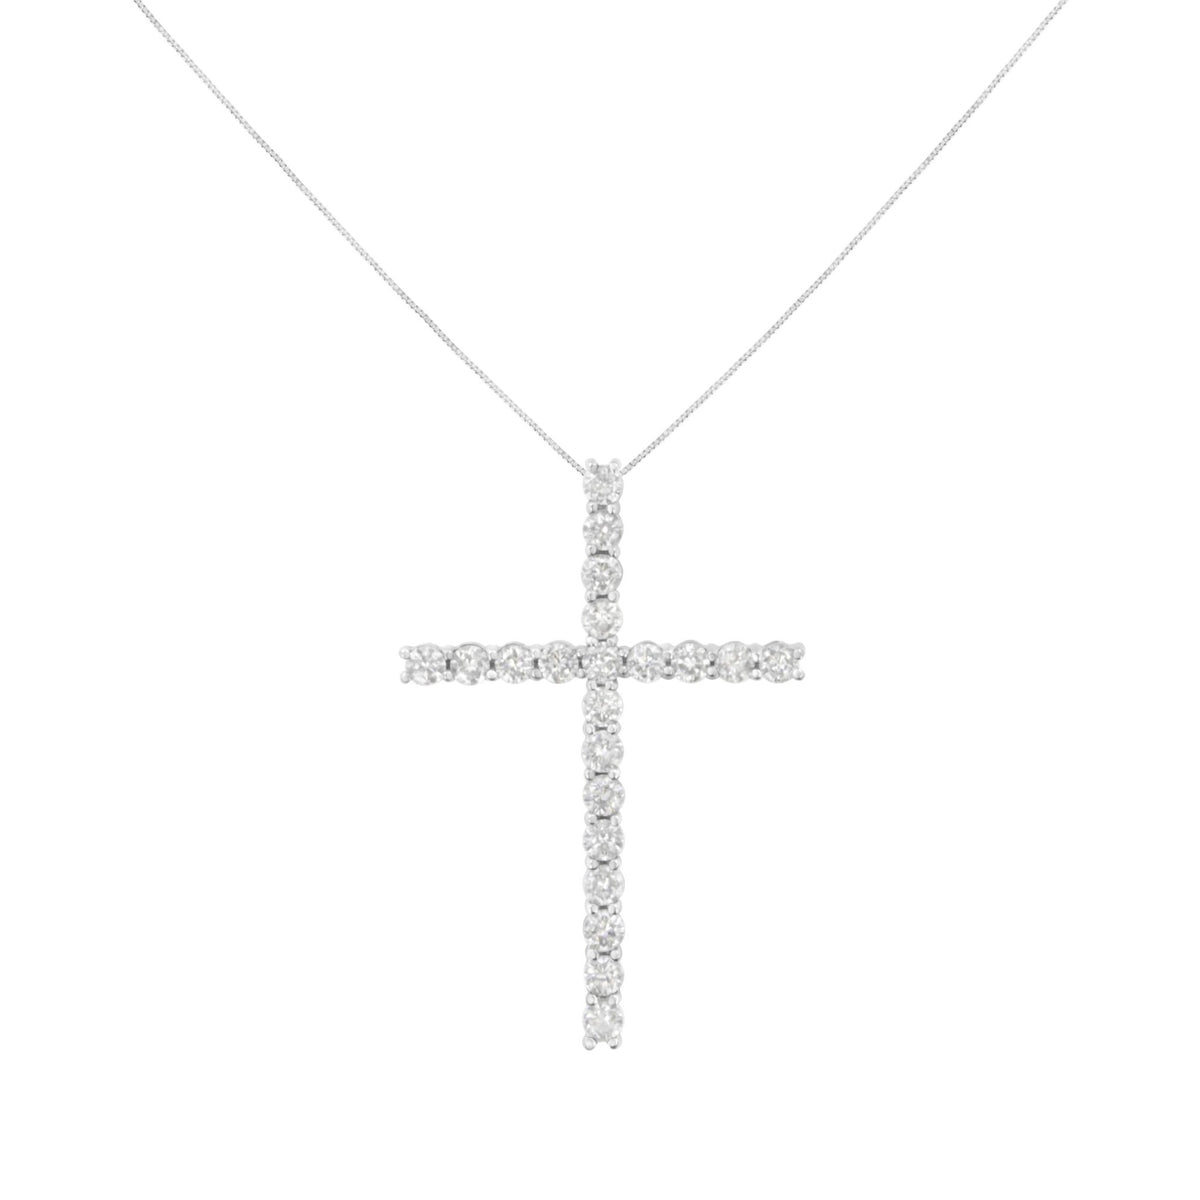 .925 Sterling Silver 4.0 Cttw Diamond 2-1/4&quot; Cross Pendant with Box Chain Necklace (I-J Color, I1-I2 Clarity) - 18&quot; - LinkagejewelrydesignLinkagejewelrydesign